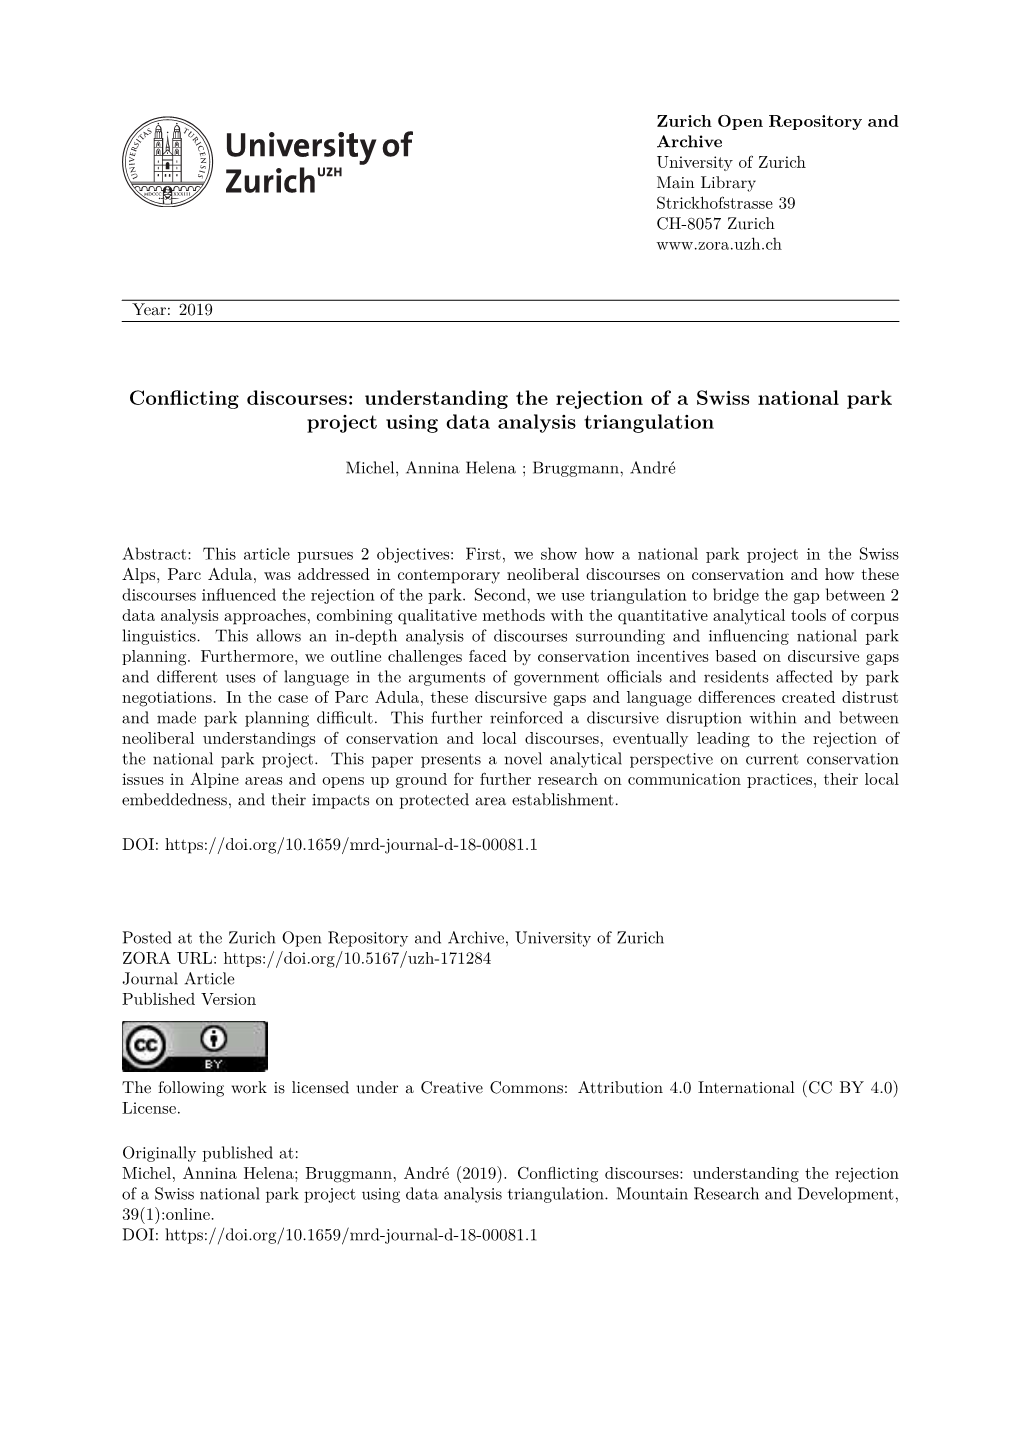 Conflicting Discourses: Understanding the Rejection of a Swiss National Park Project Using Data Analysis Triangulation